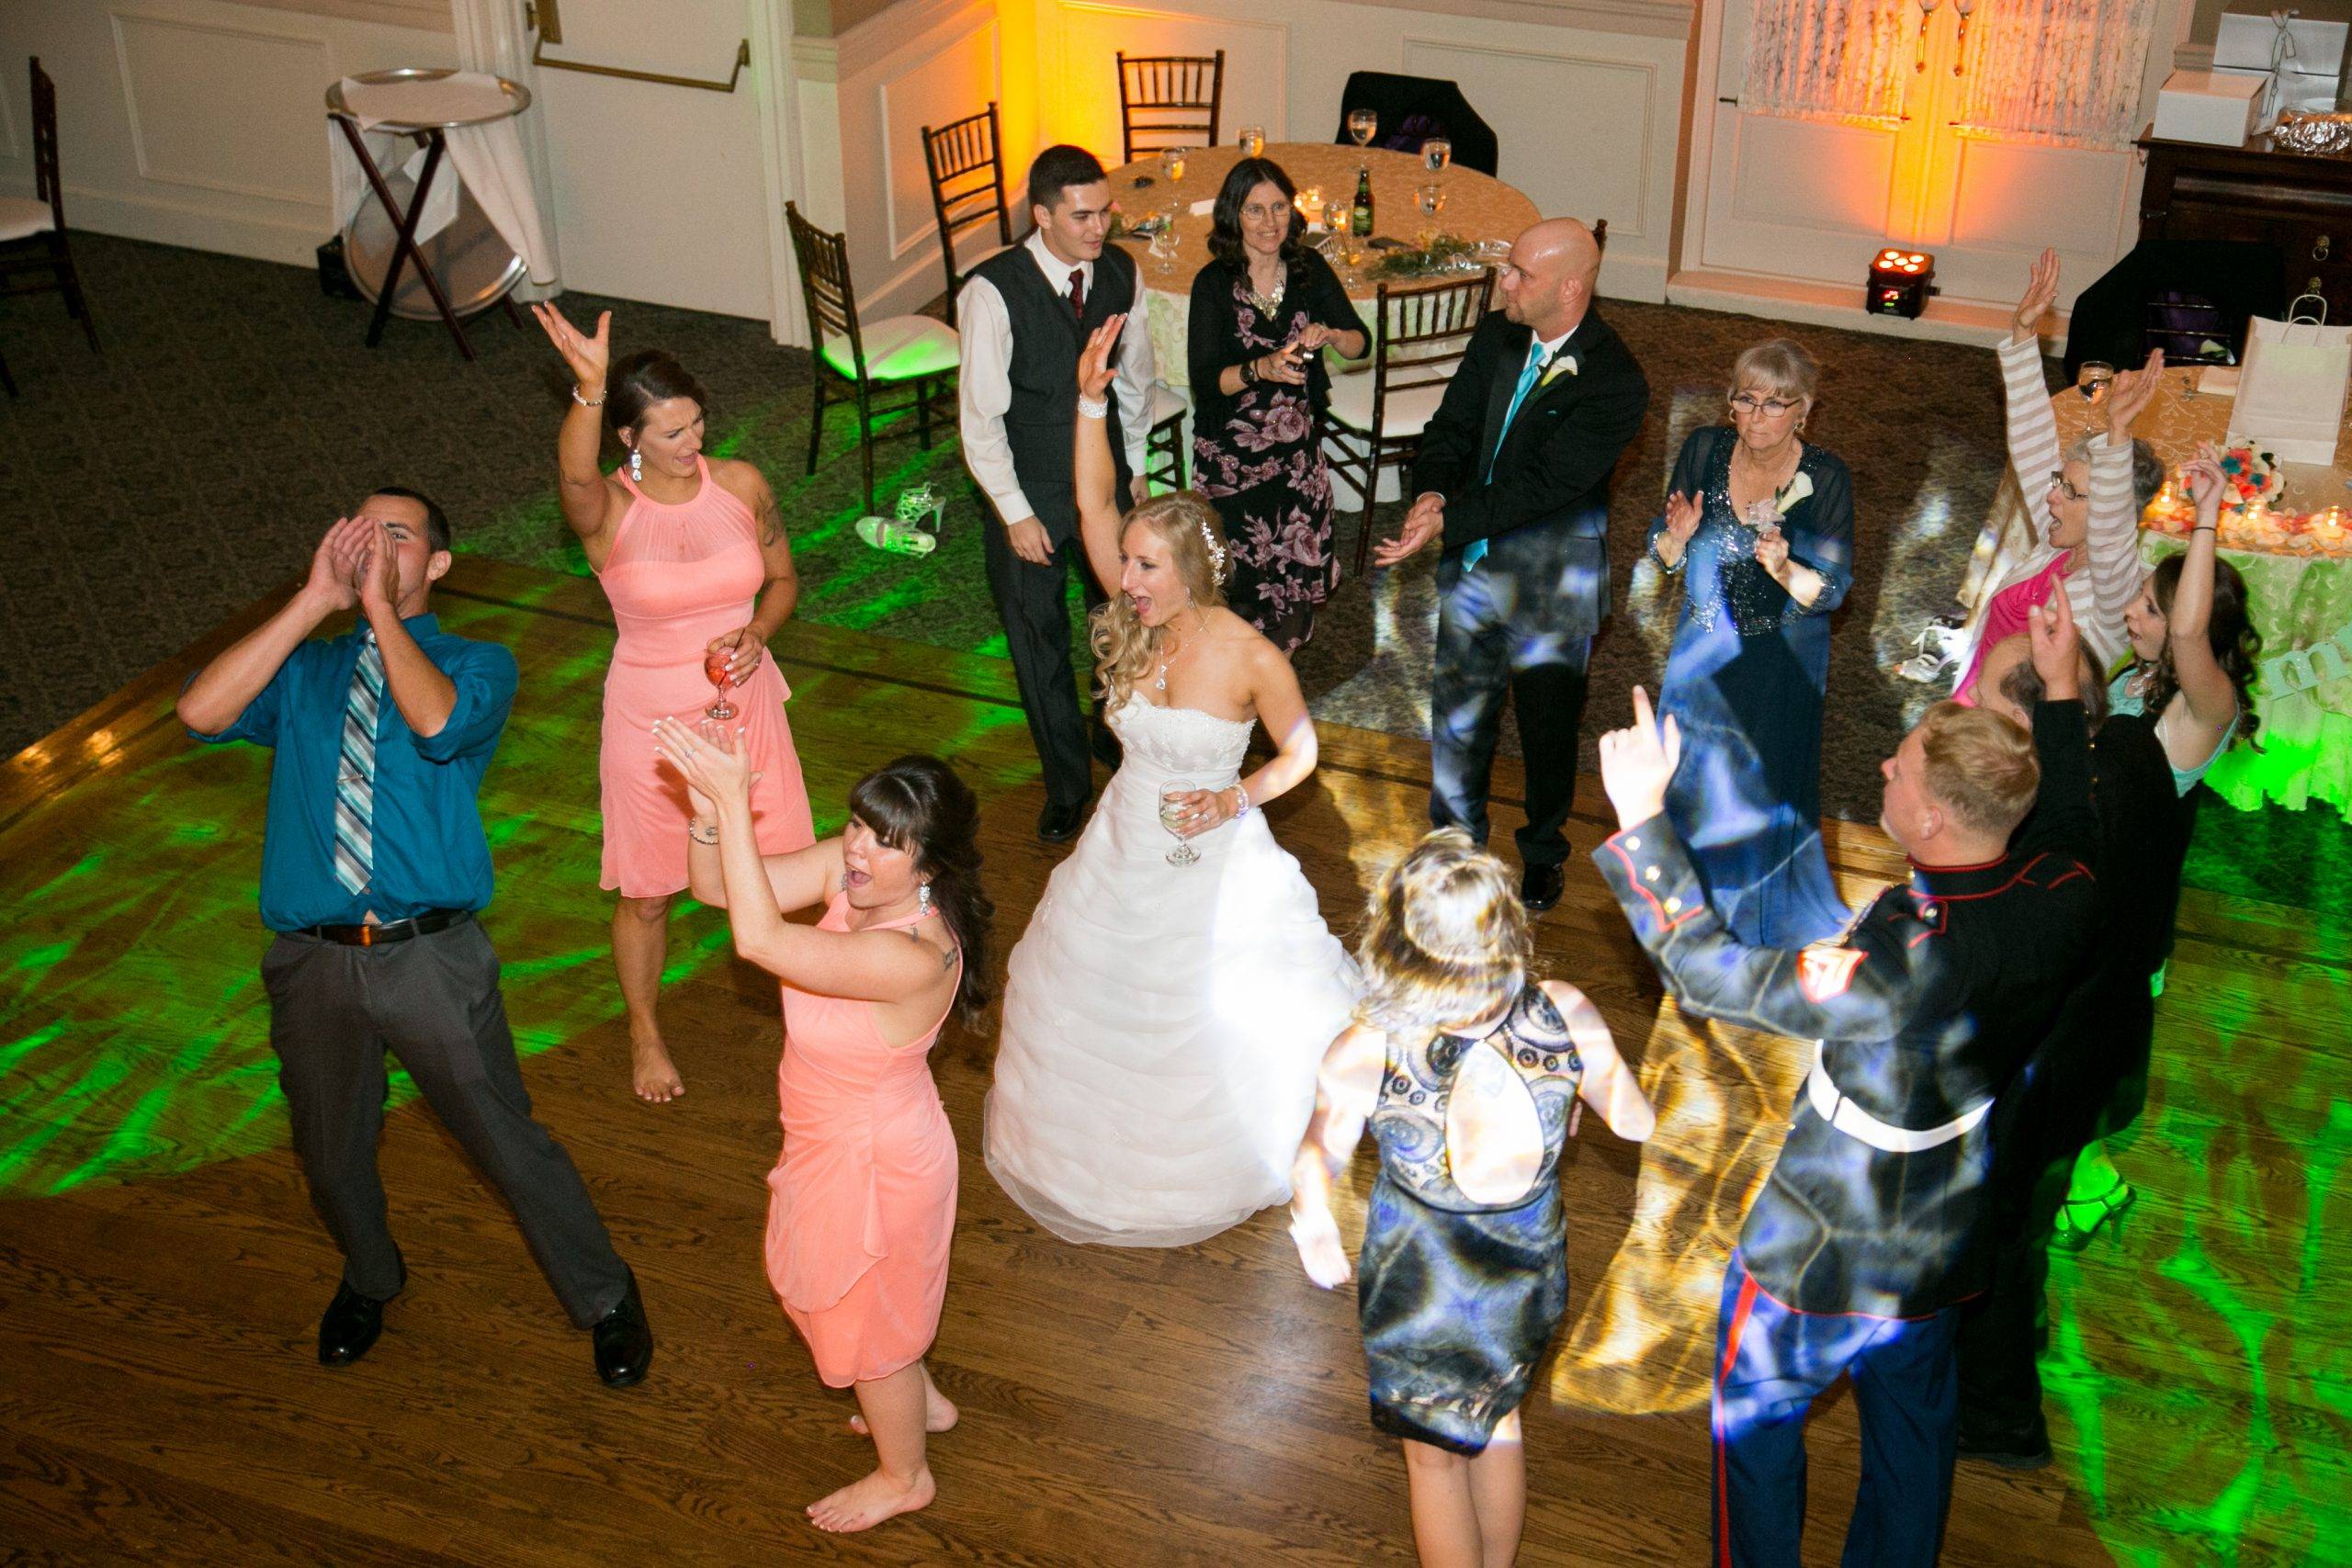 A group of people on a dance floor.